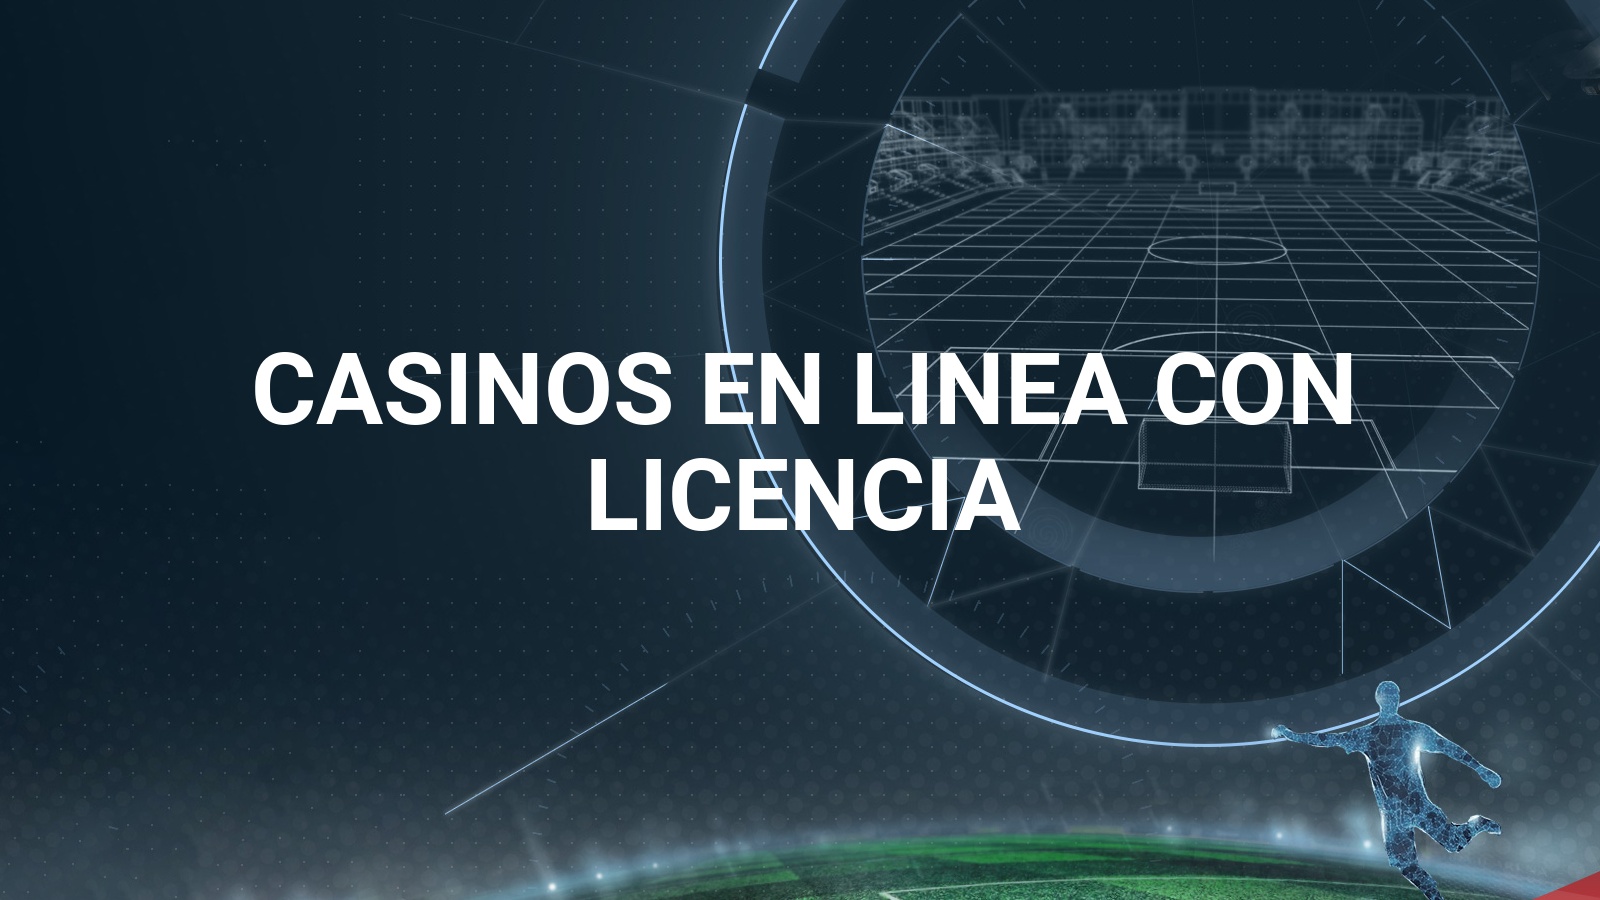 Where Will casino sin licencia Be 6 Months From Now?